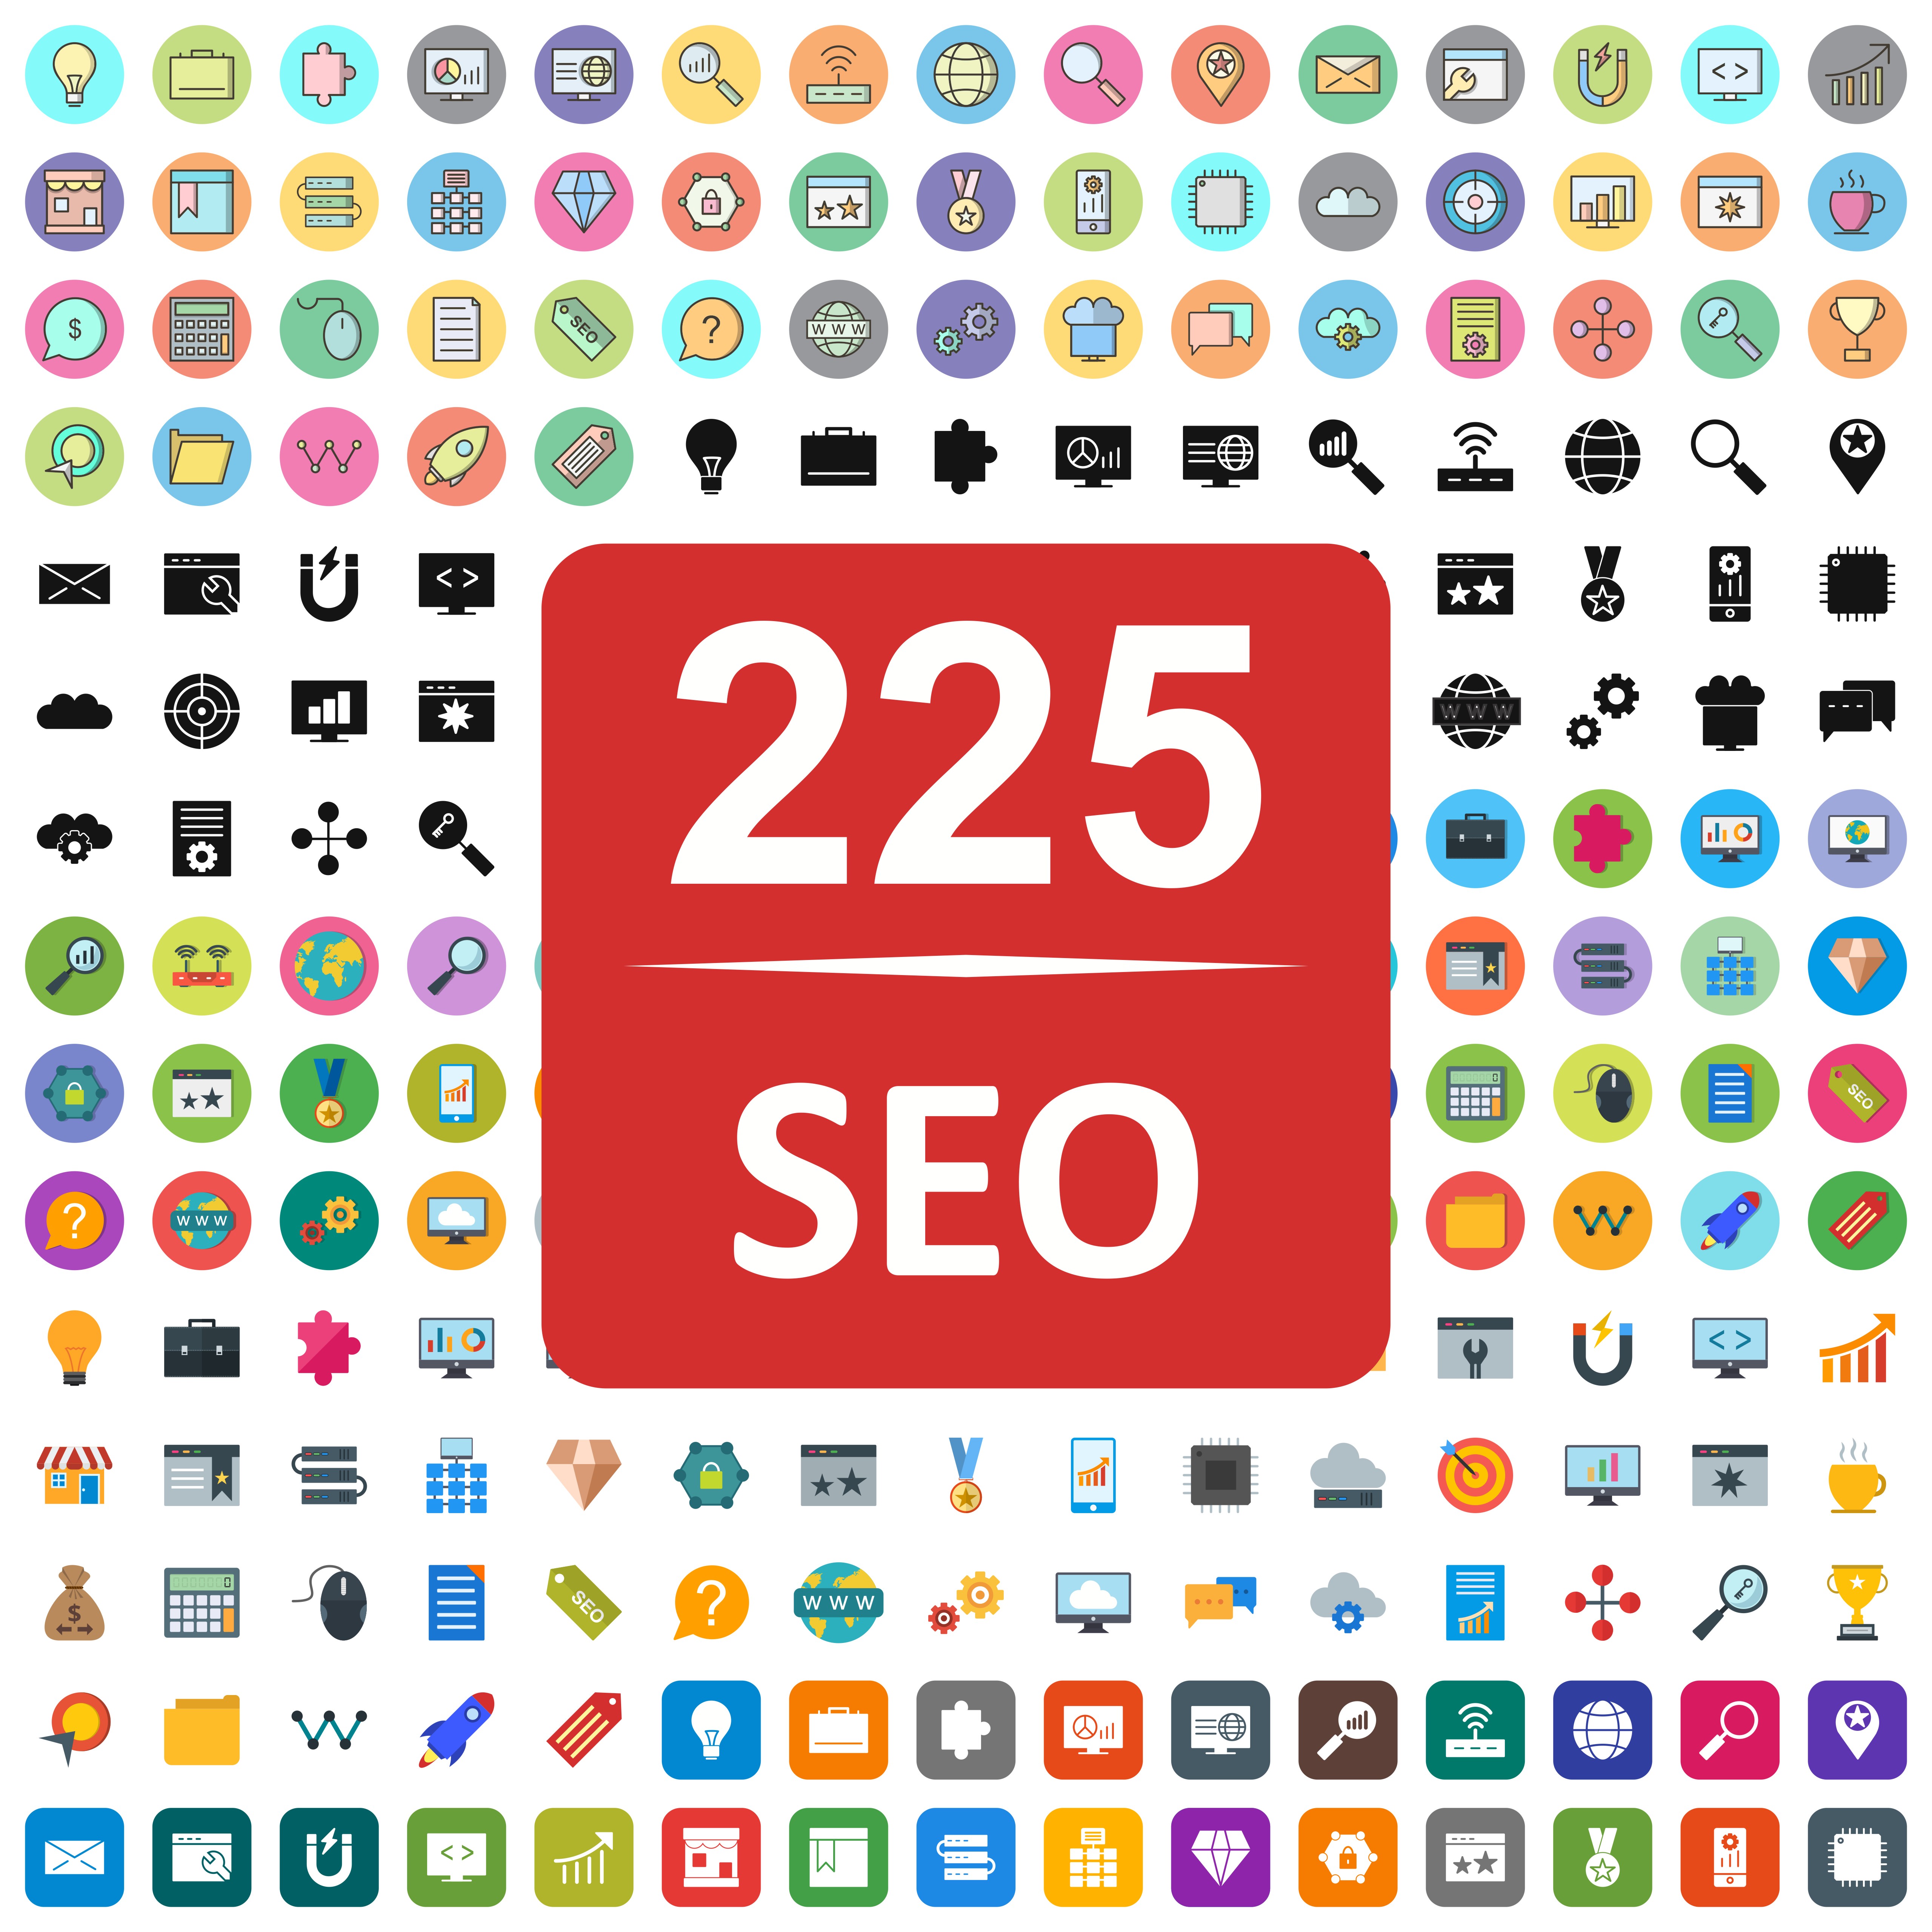 Download Set of Vector SEO Search Engine Optimization Icons 280145 - Download Free Vectors, Clipart ...